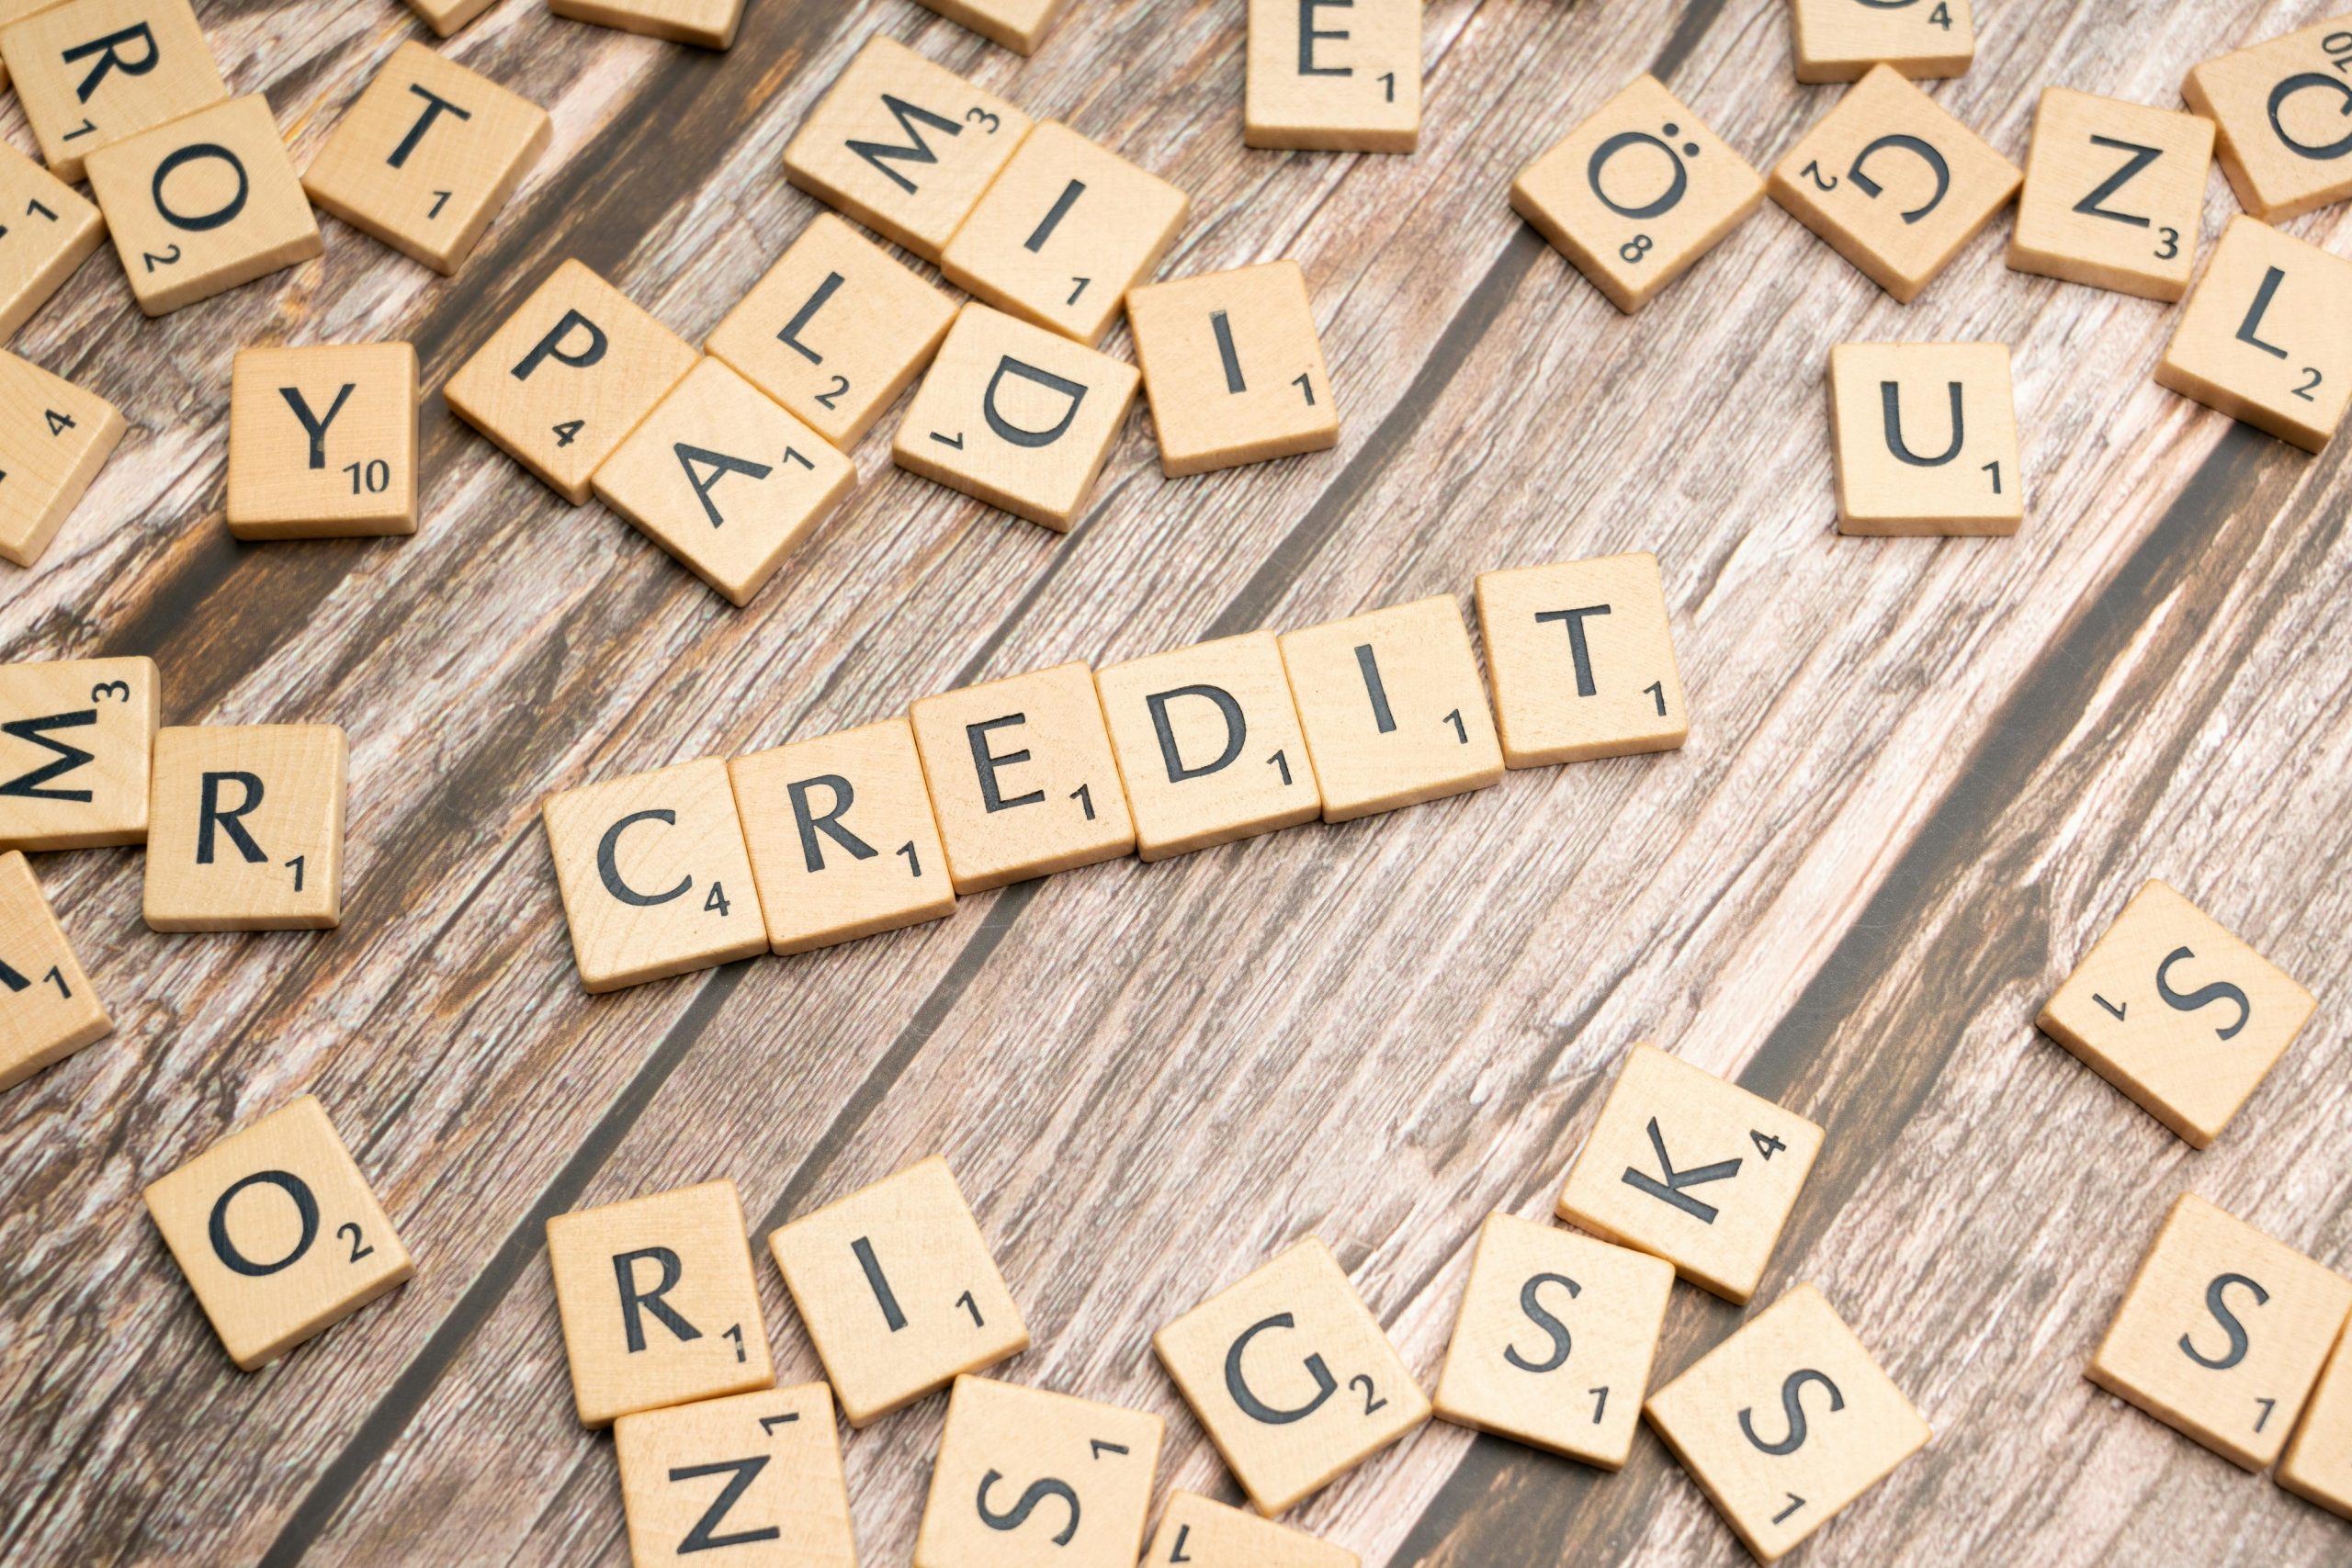 10 tips to repair your credit and improve your credit score